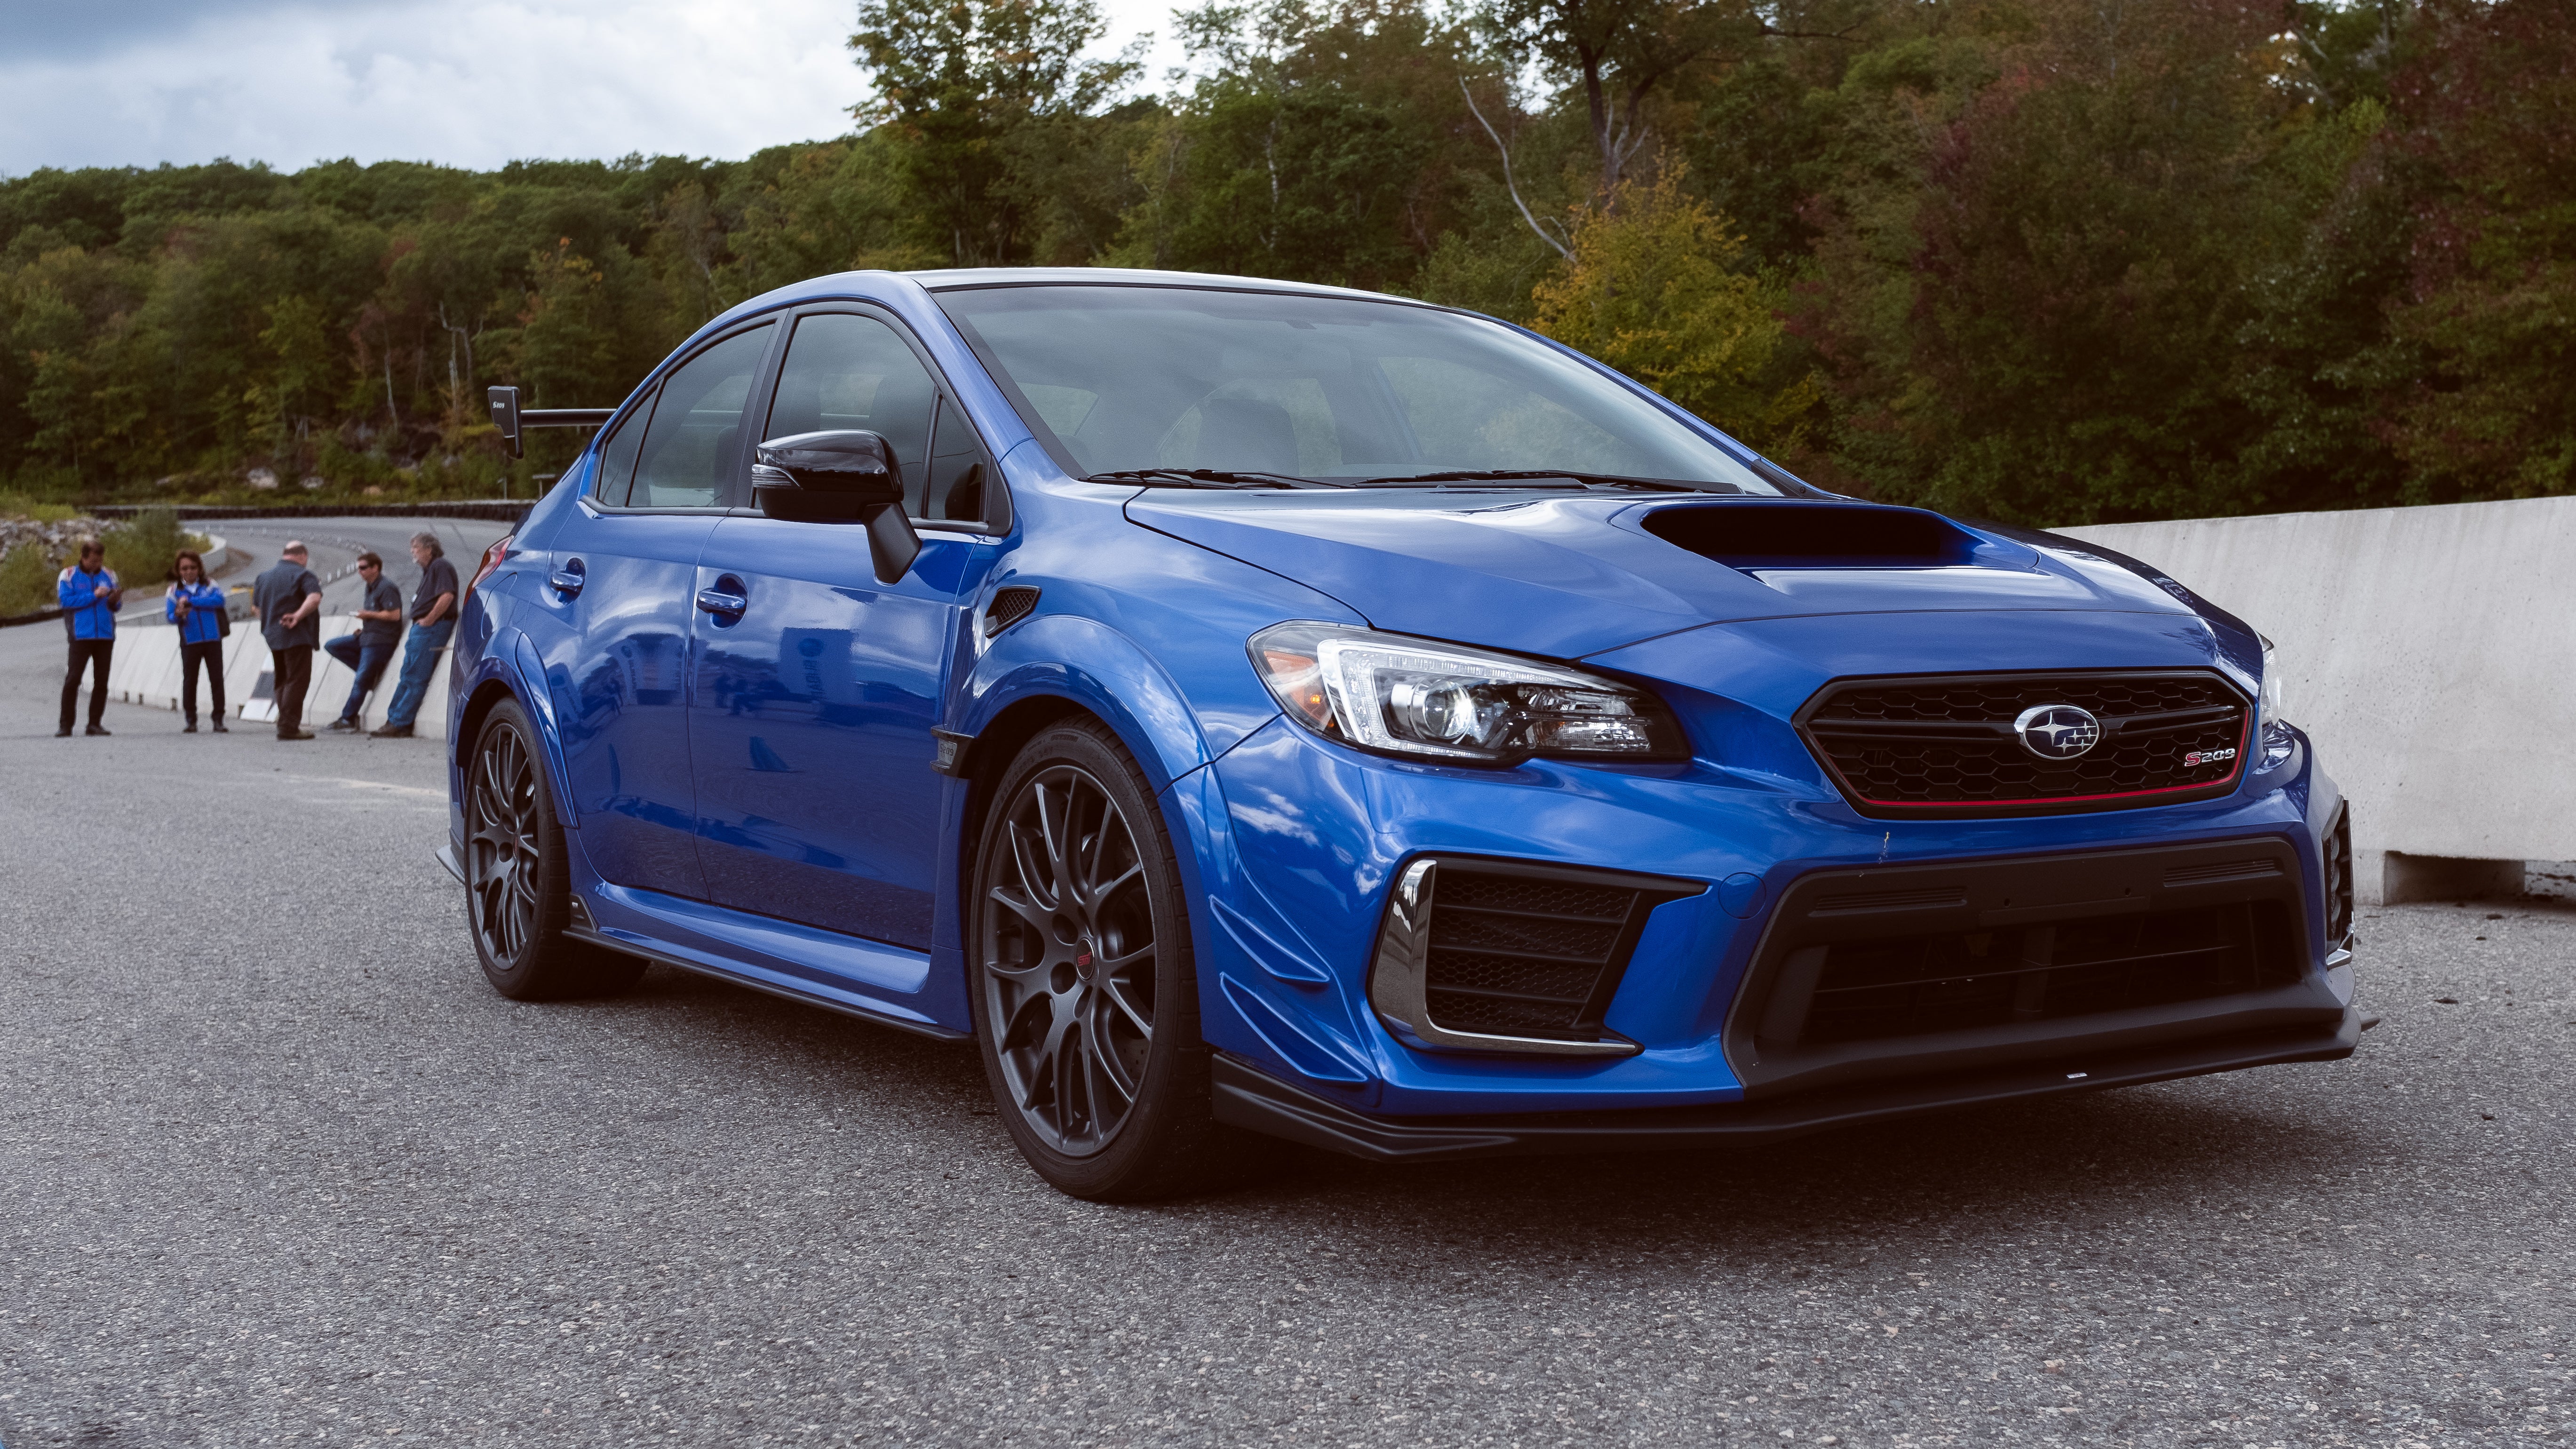 Why The 19 Subaru Sti S9 Is A Pain To Even Sell In America